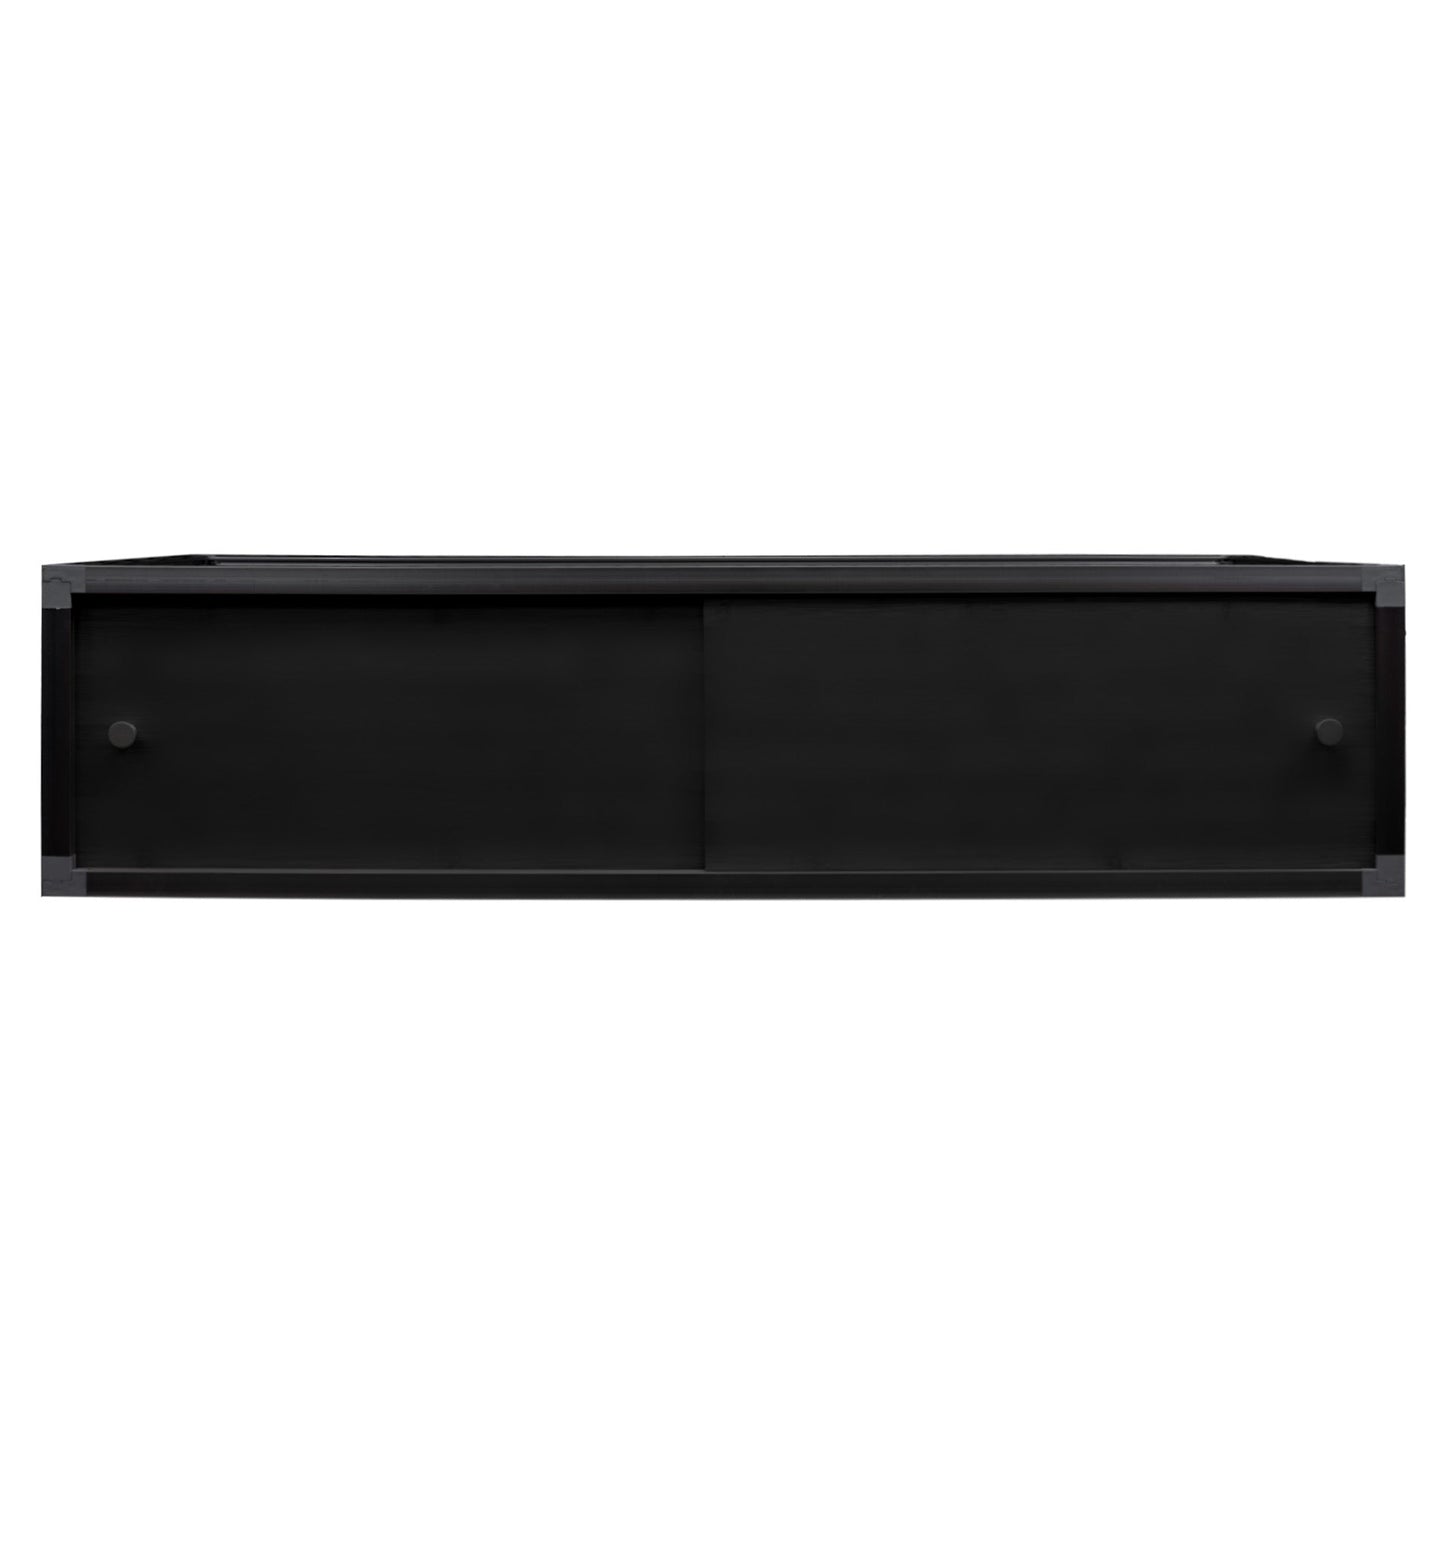 Black Meridian Deluxe Stacking Spacer - for 122x61 based Meridian enclosures